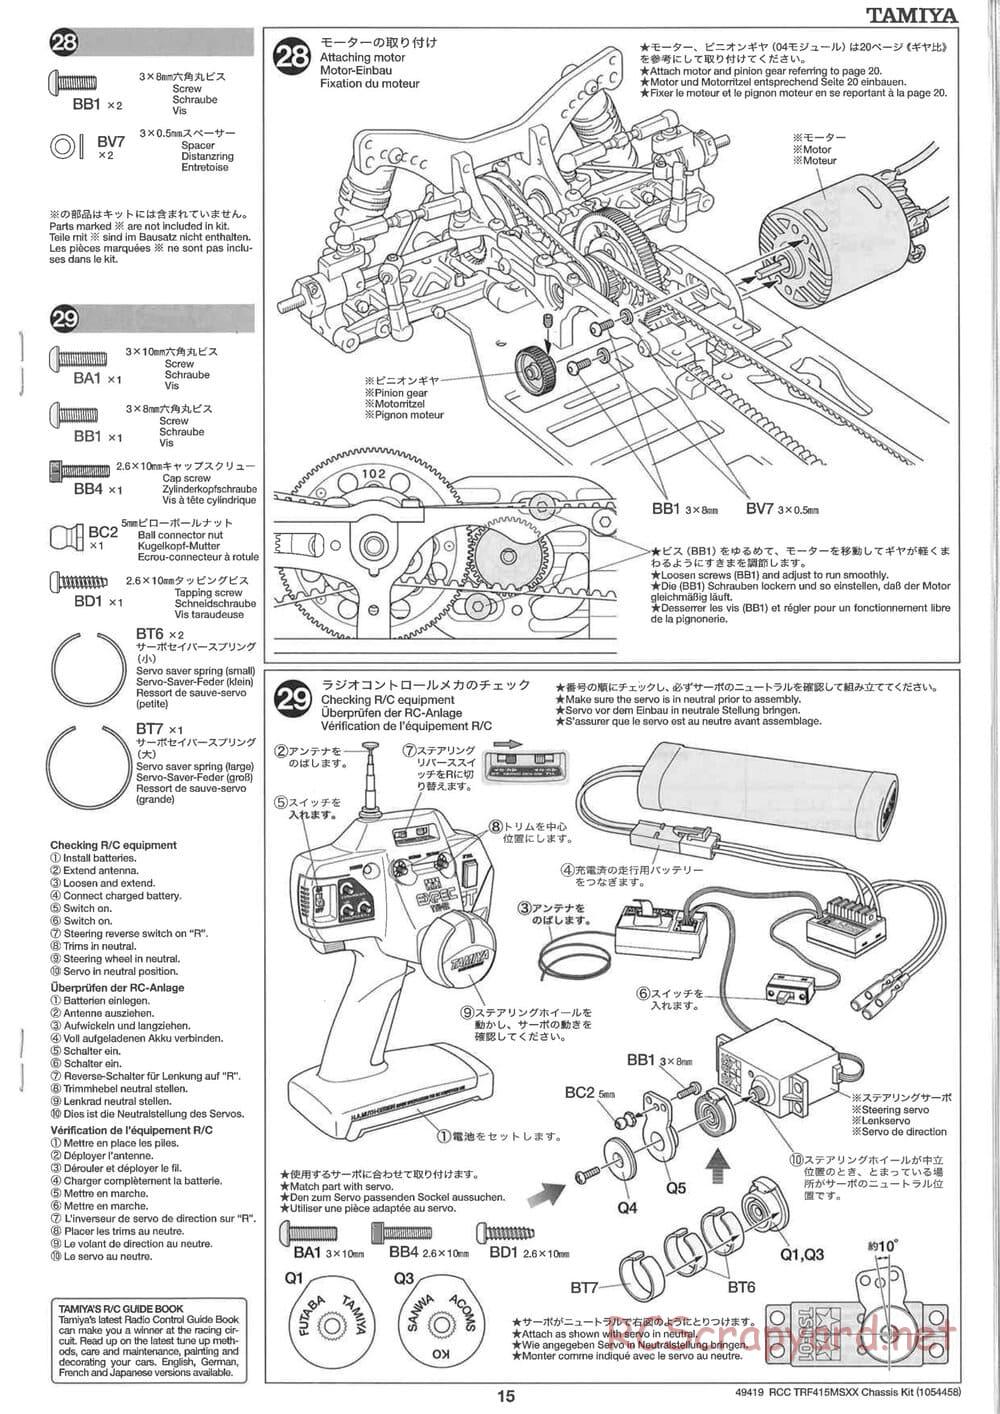 Tamiya - TRF415-MSXX Chassis - Manual - Page 15